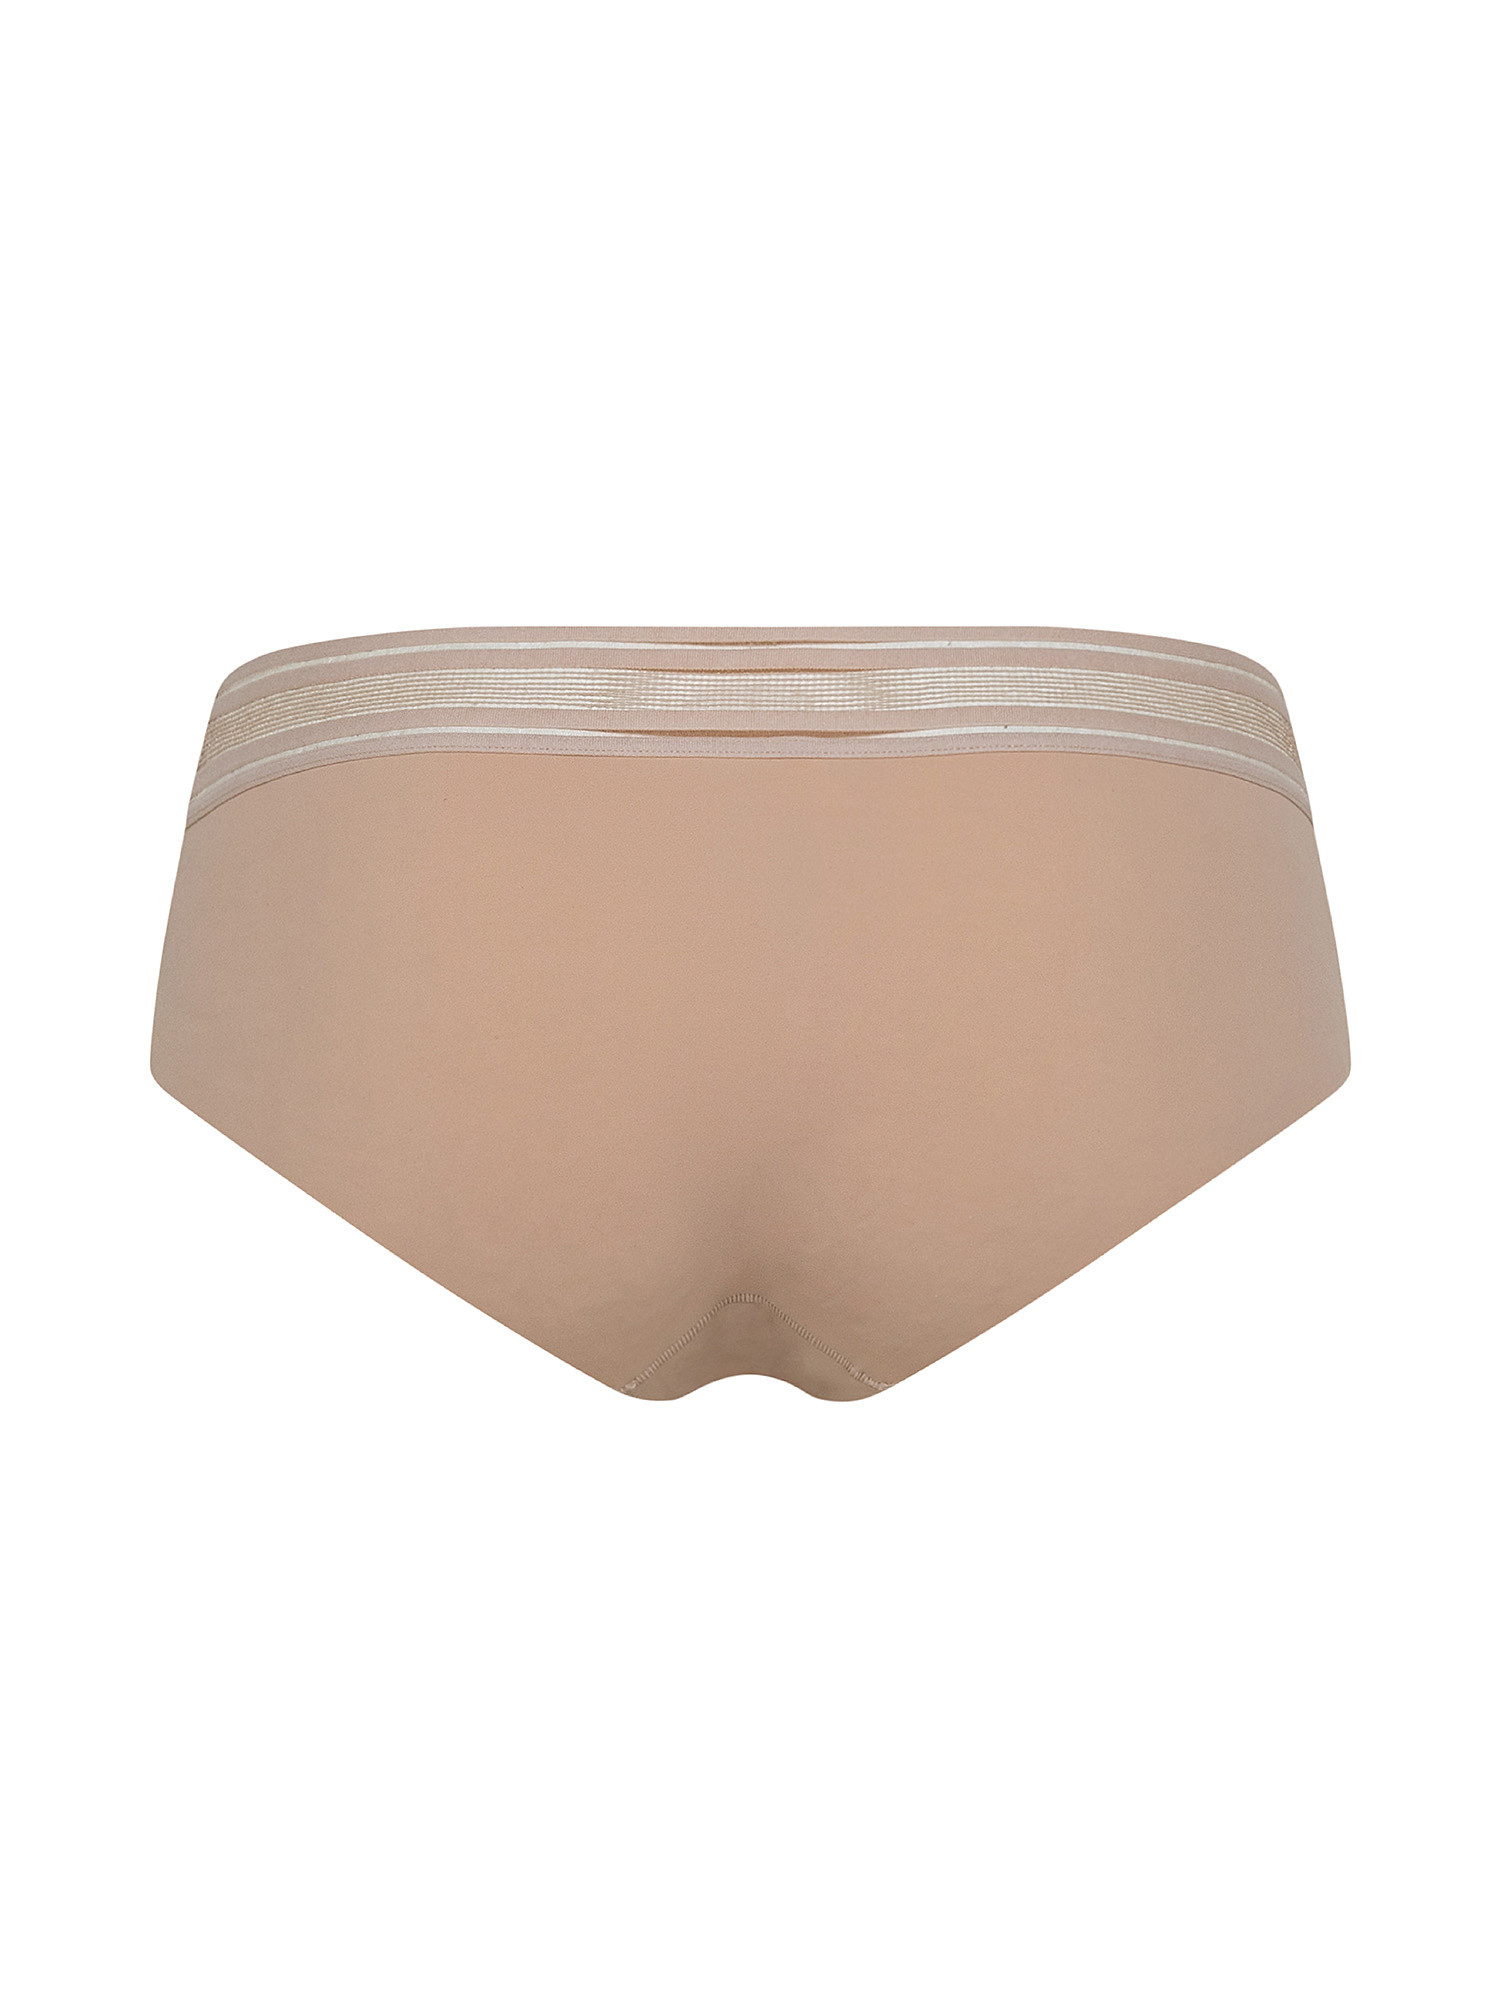 Briefs with graphic elastic band, Sand, large image number 1